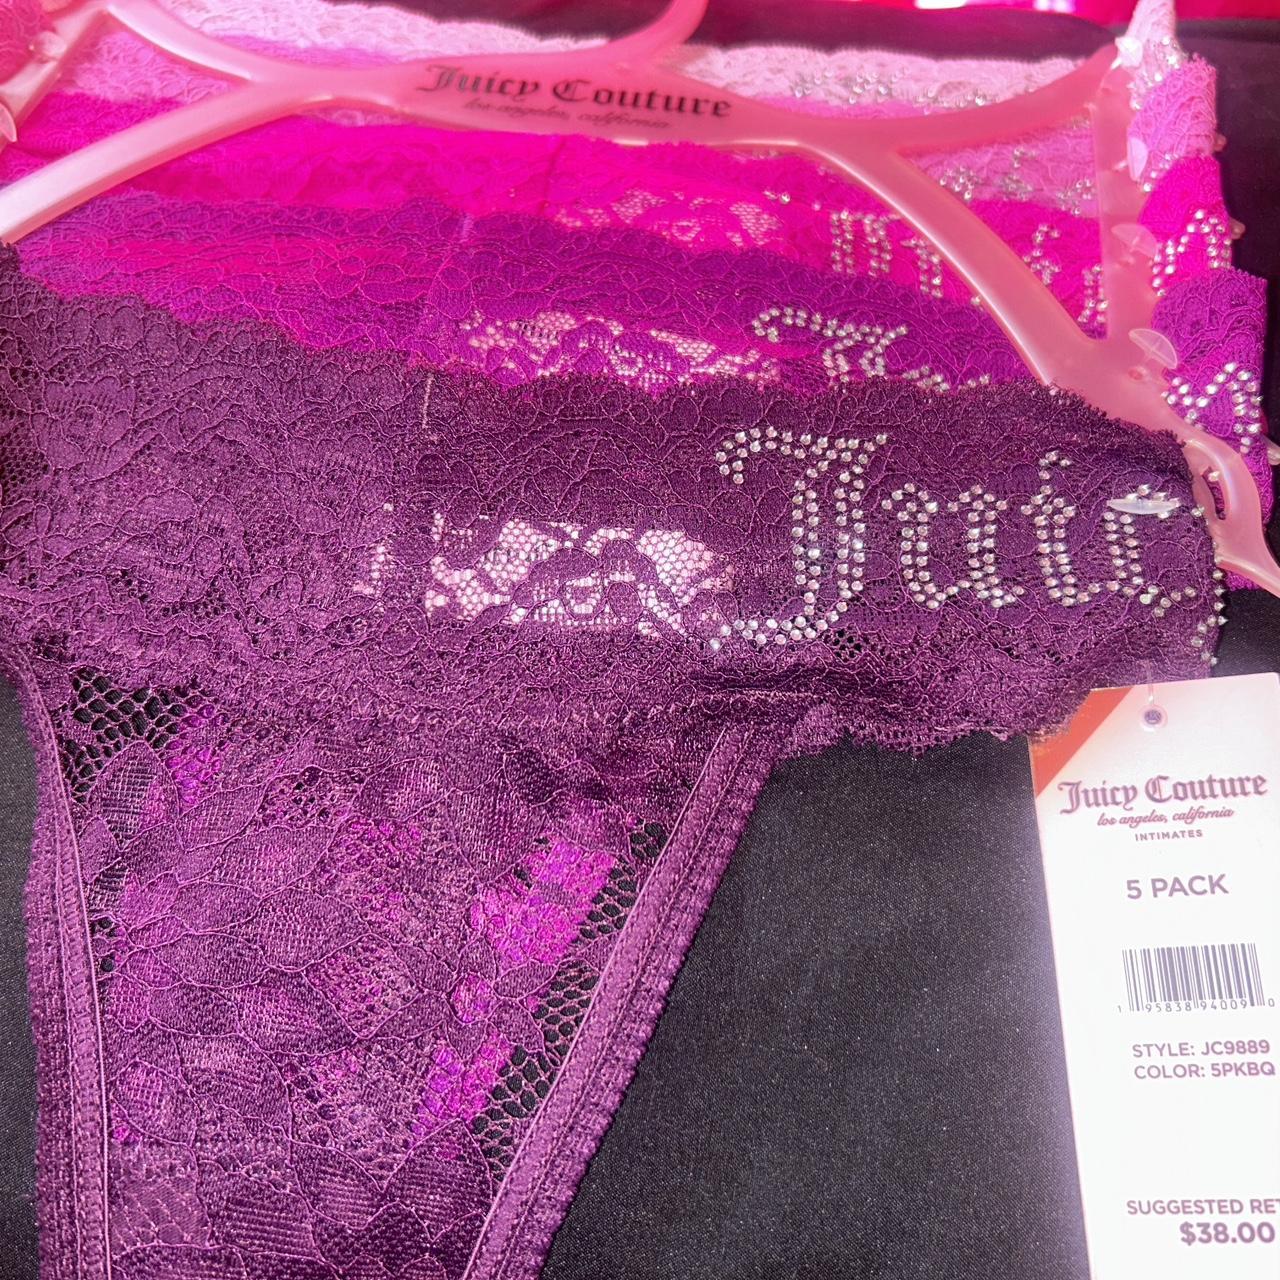 Brand New Juicy Couture Lace Rhinestone - Depop